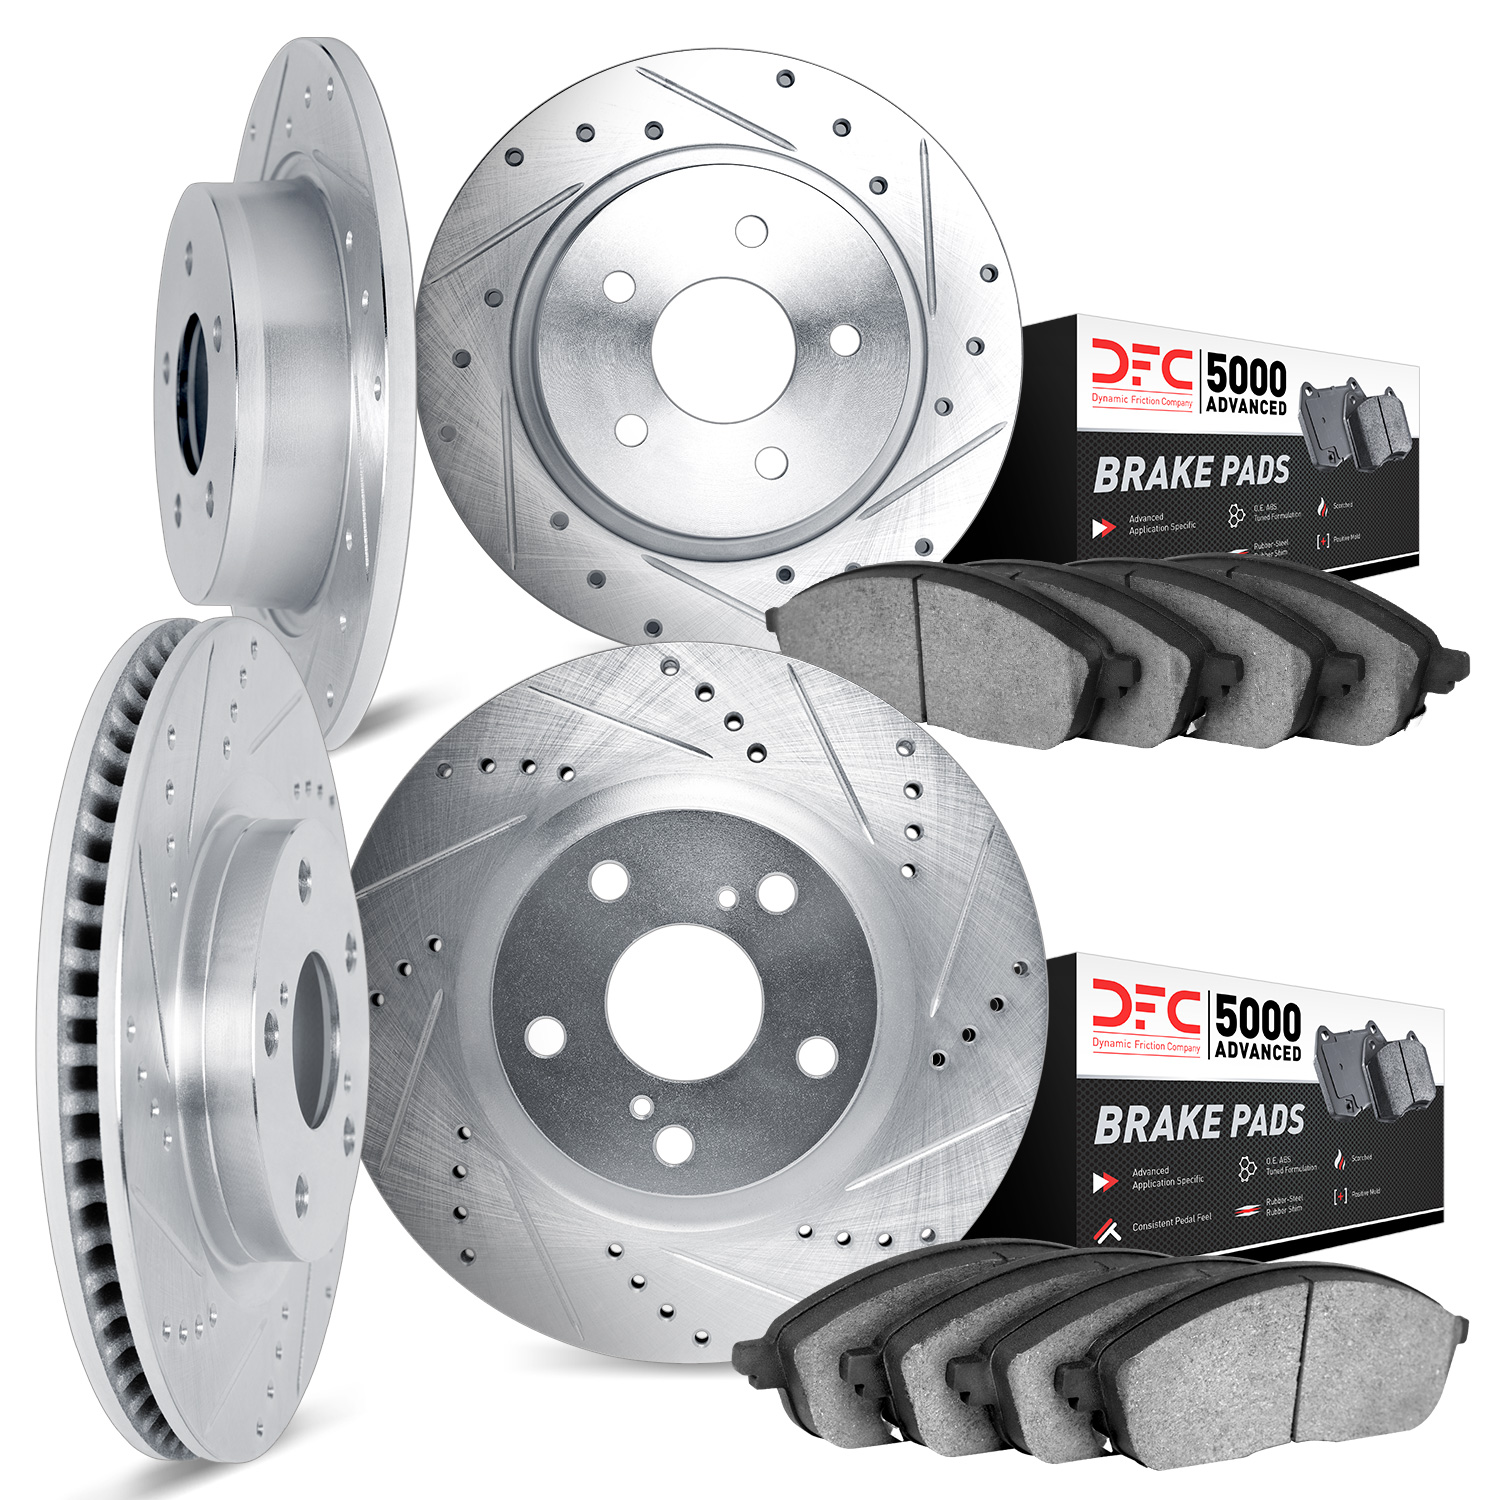 7504-76153 Drilled/Slotted Brake Rotors w/5000 Advanced Brake Pads Kit [Silver], 2002-2003 Lexus/Toyota/Scion, Position: Front a